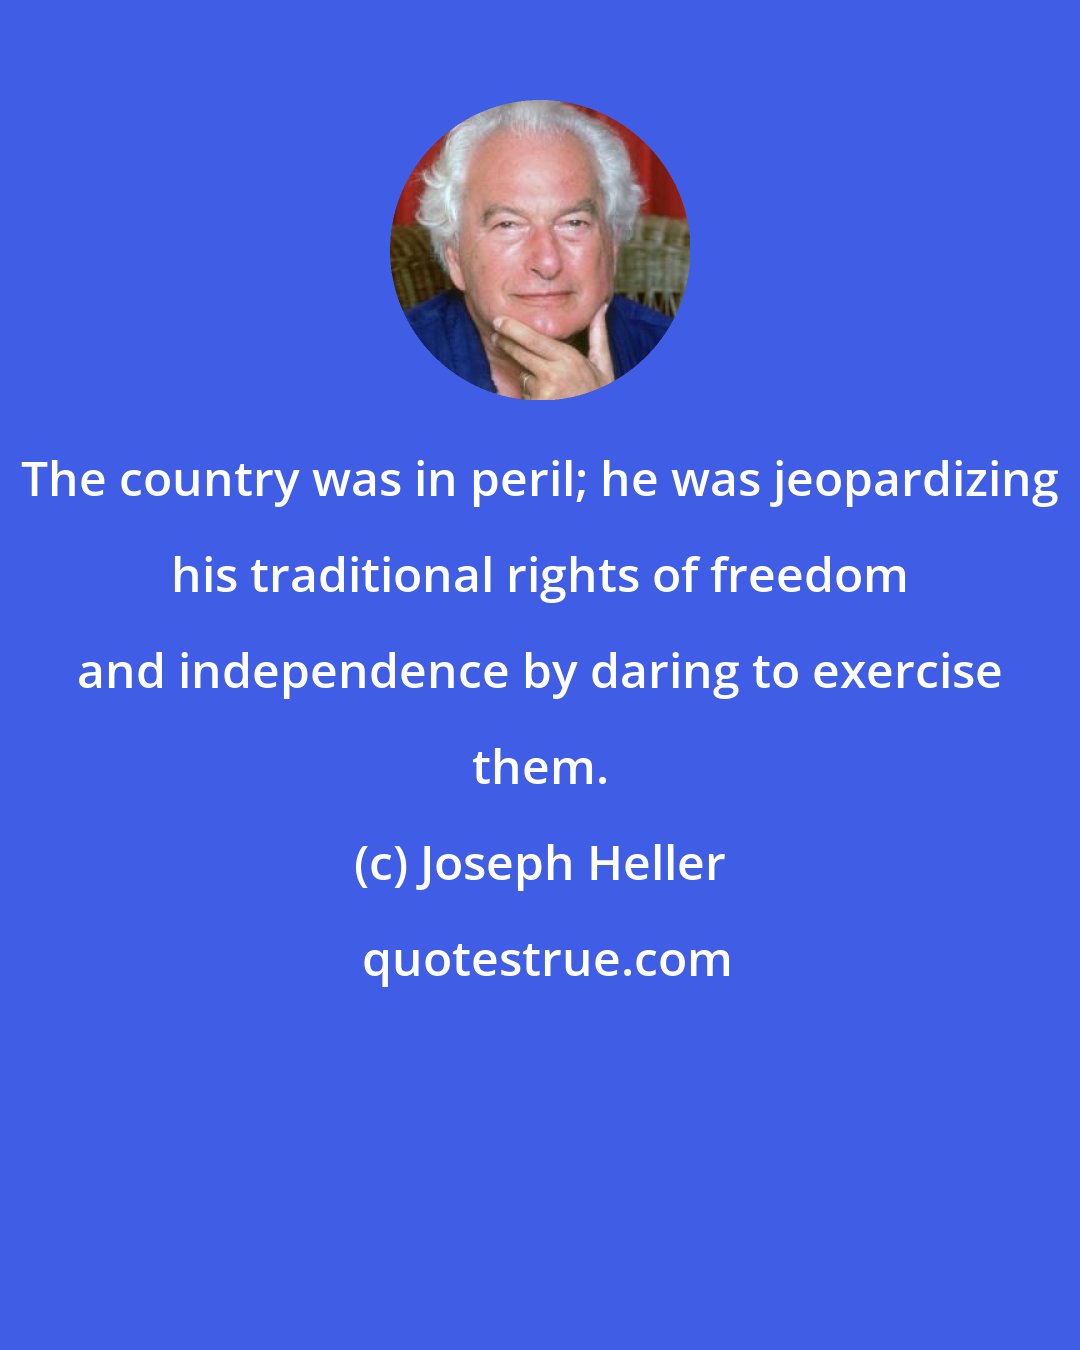 Joseph Heller: The country was in peril; he was jeopardizing his traditional rights of freedom and independence by daring to exercise them.